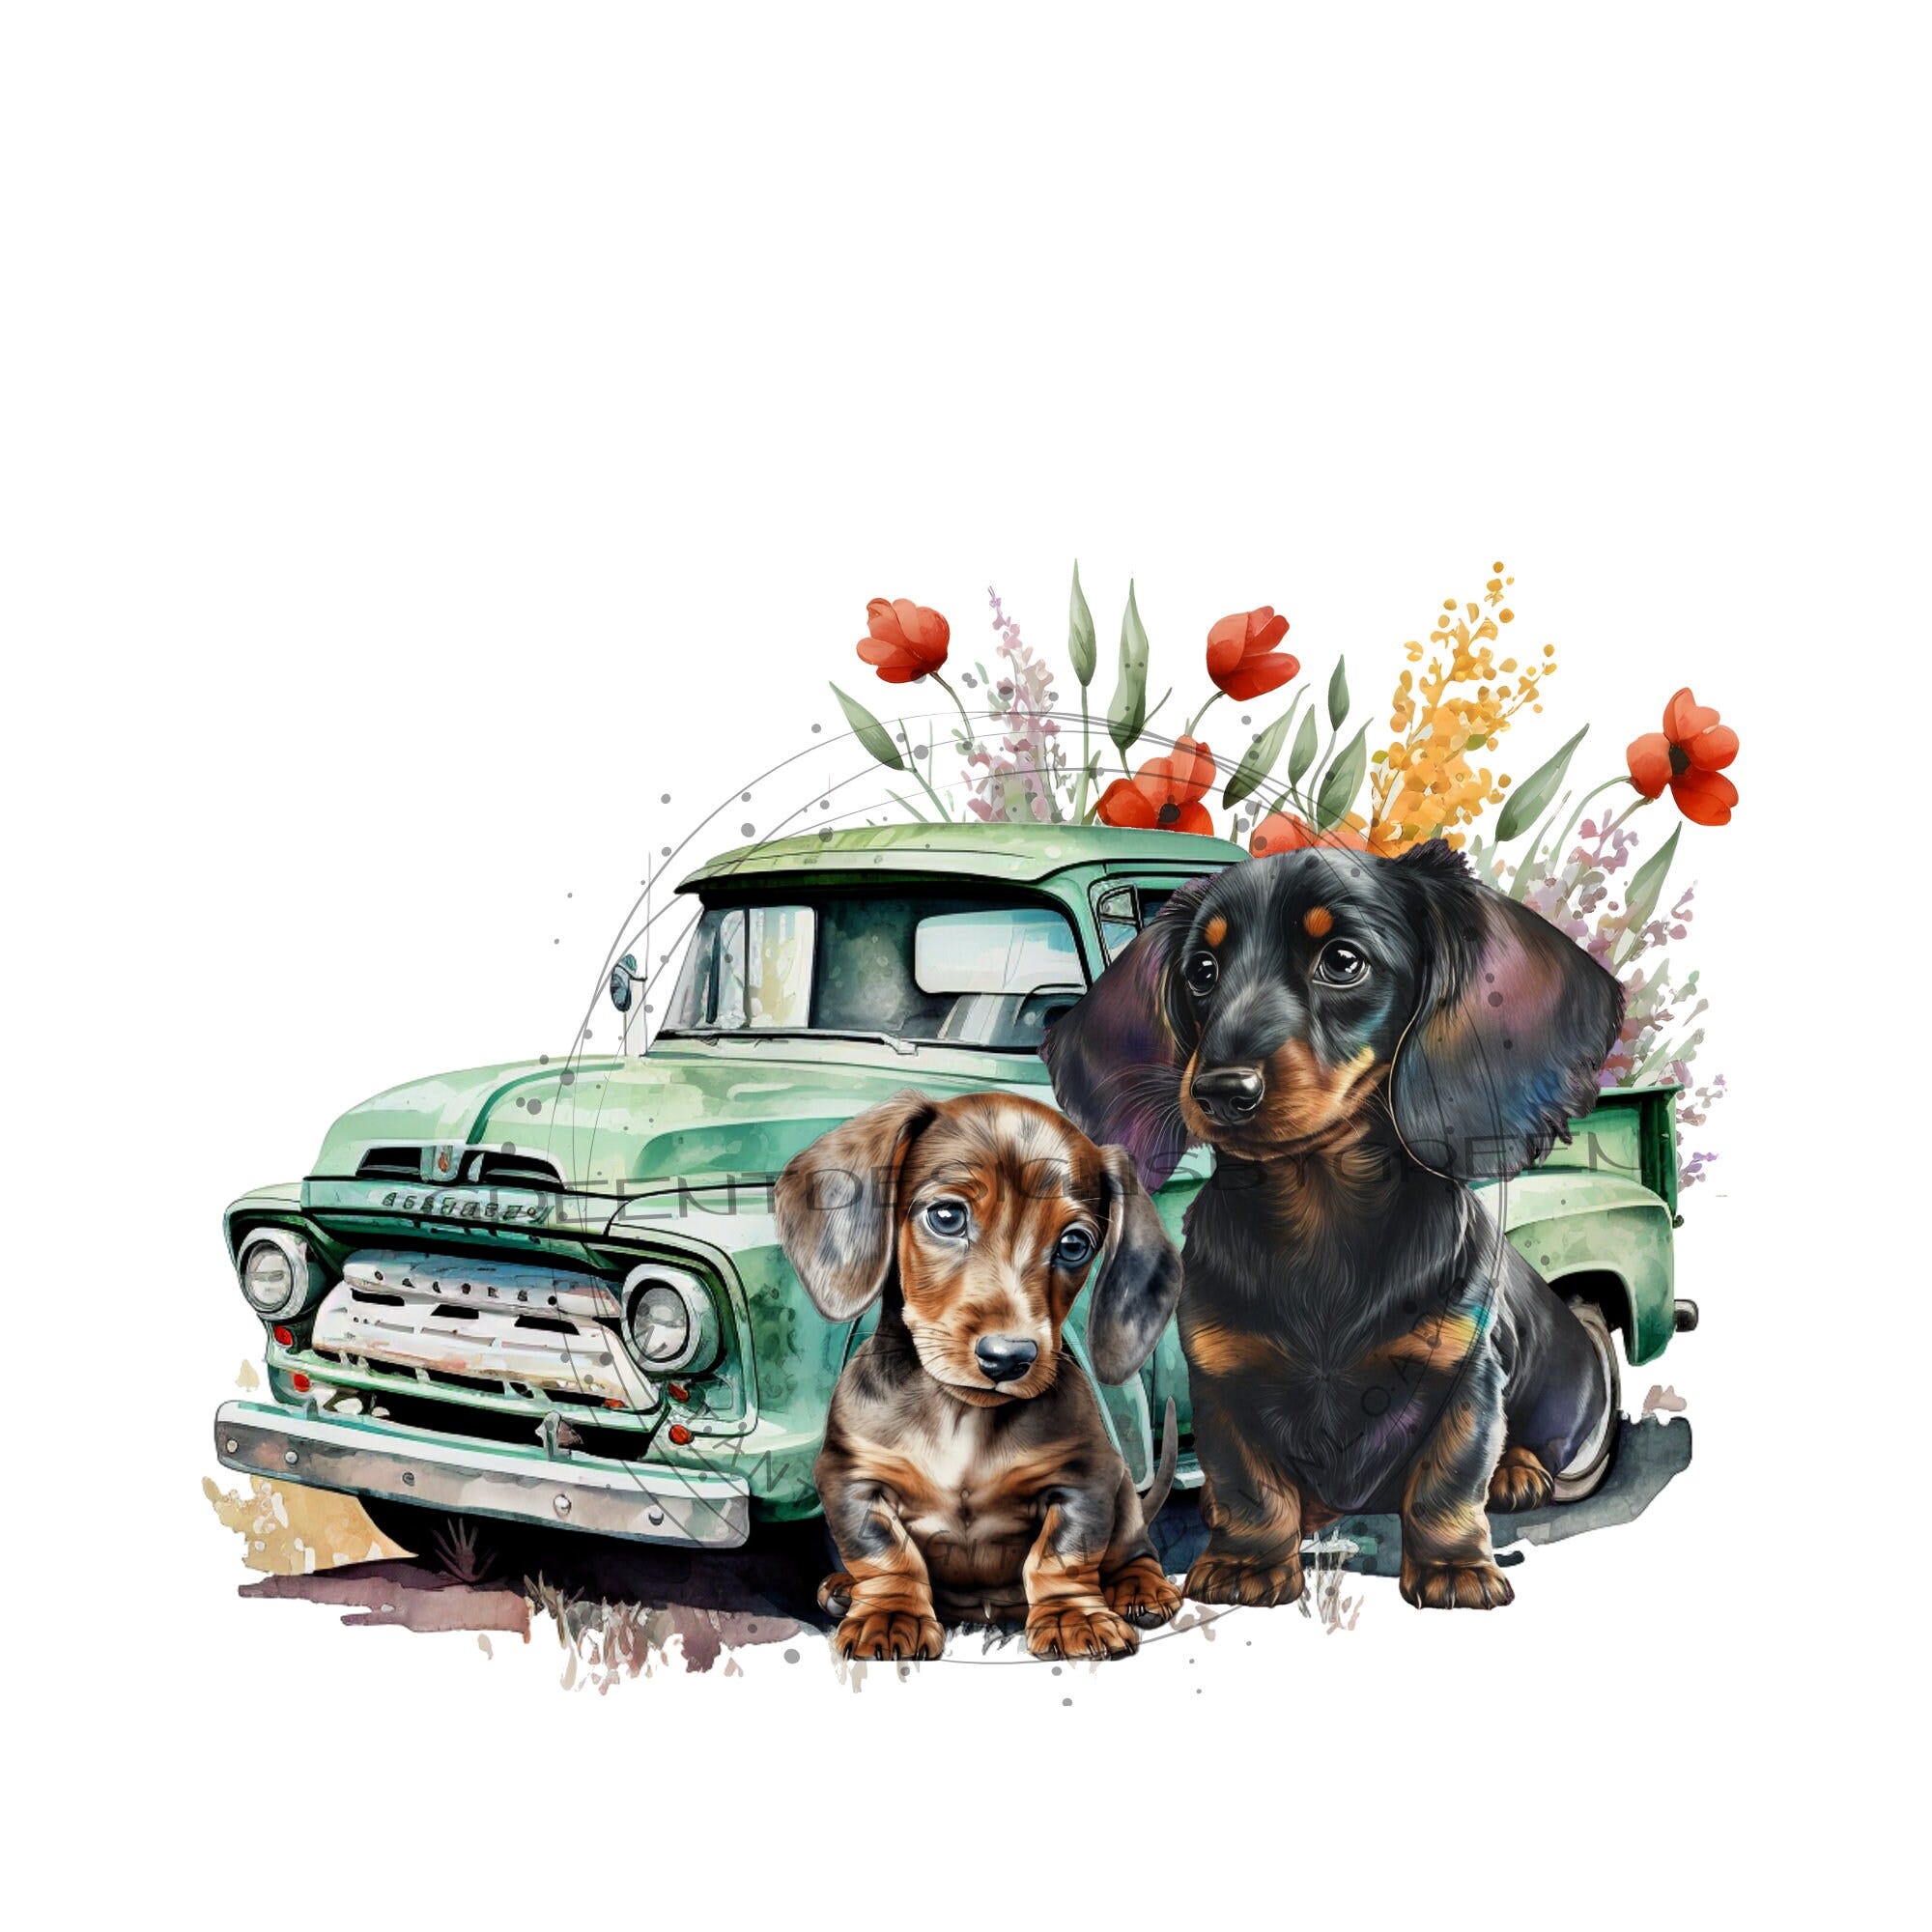 Puppy Dog PNG file, cute dog sublimation, vintage truck and wildflower PNG, Puppy clipart for sublimation, cat and dog PNG.